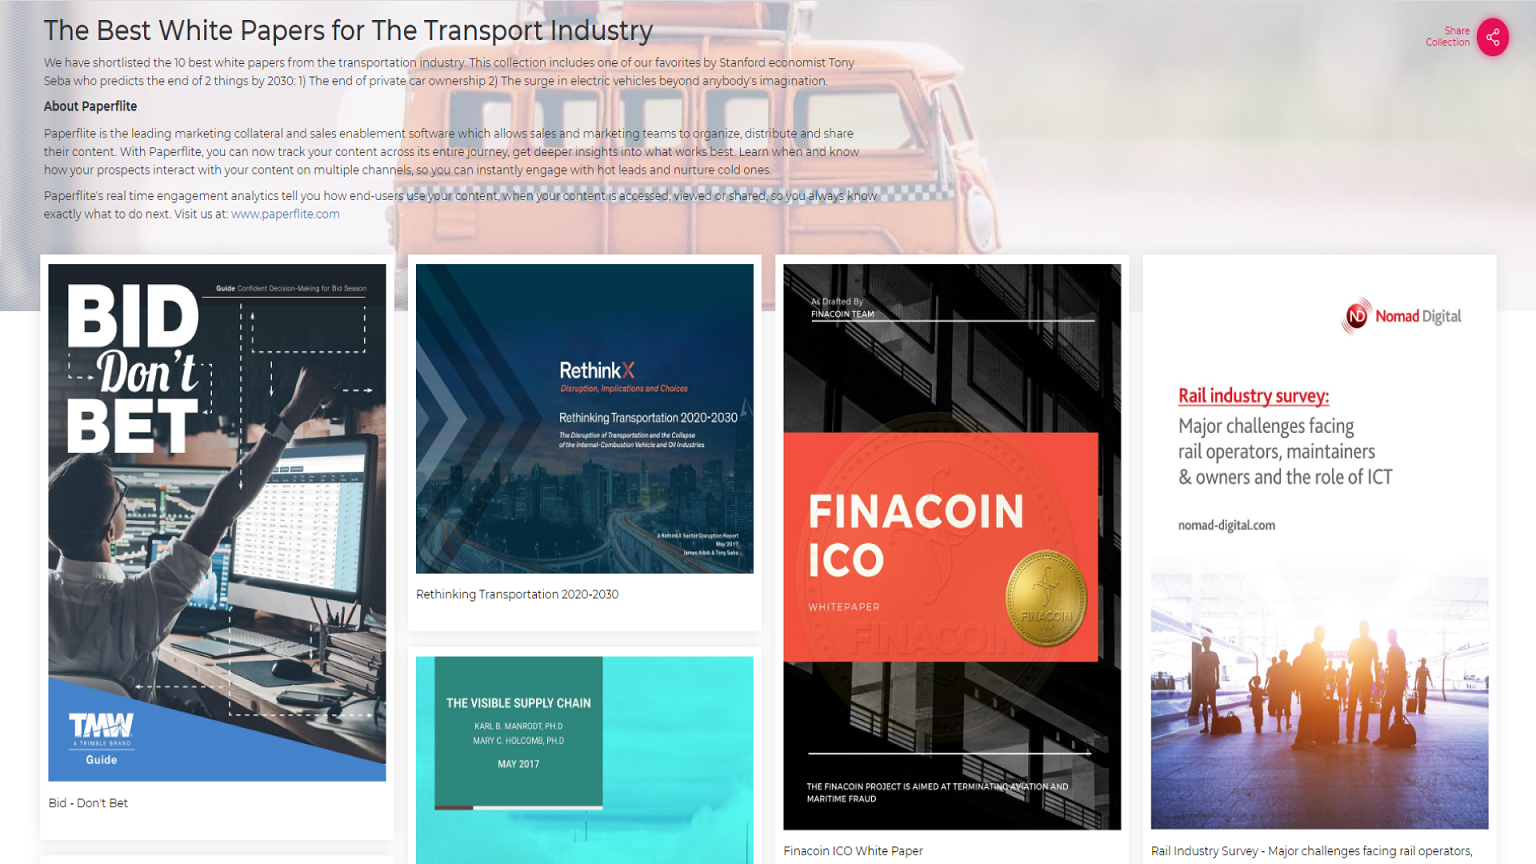 The Best White Papers for the Transport Industry